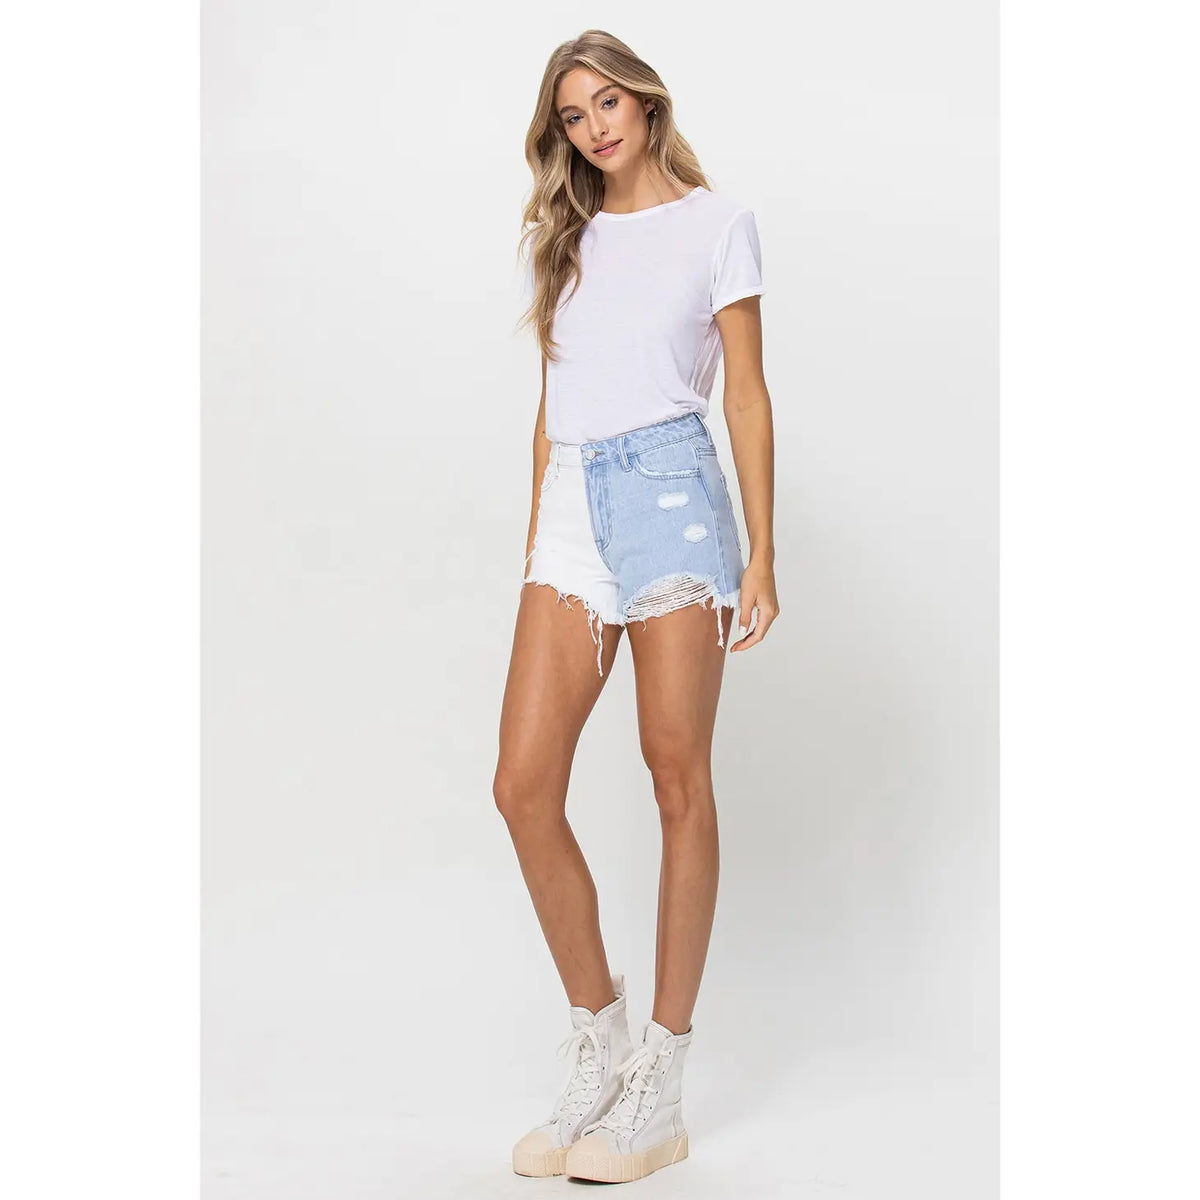 Half and Half Jean Shorts - ONFEMME By Lindsey's Kloset